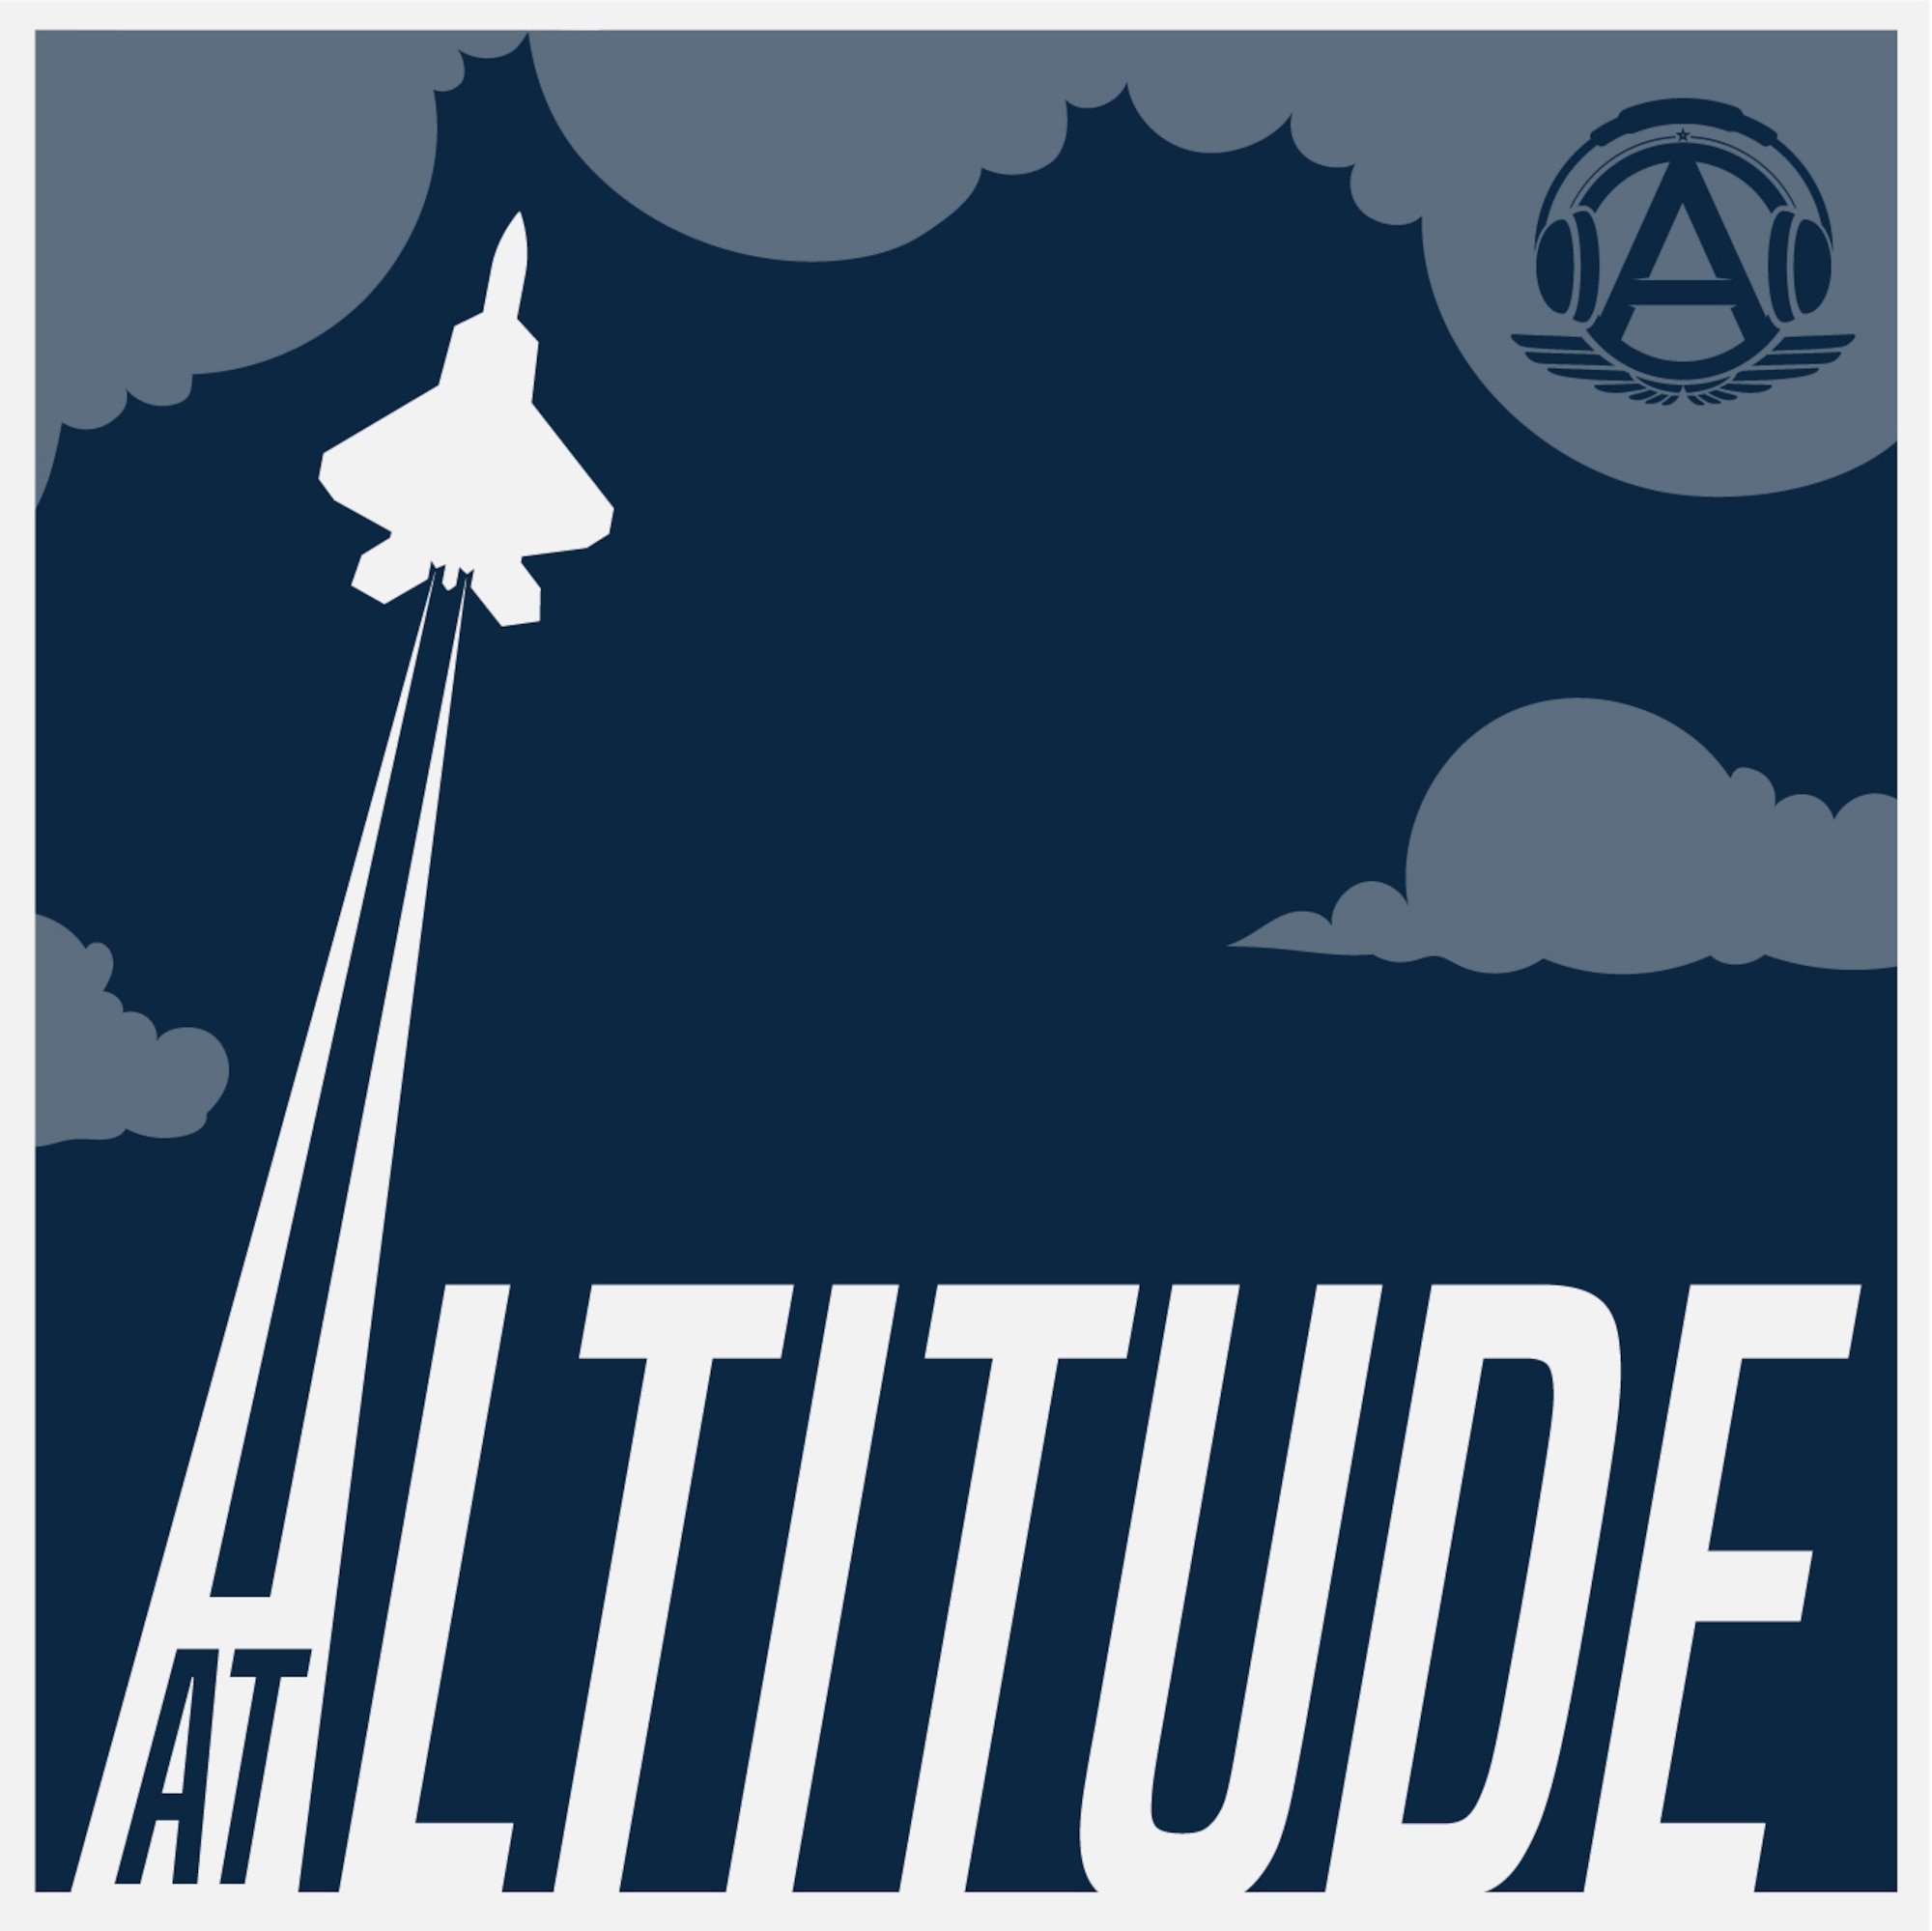 Logo for the Official Podcast of Airman Magazine